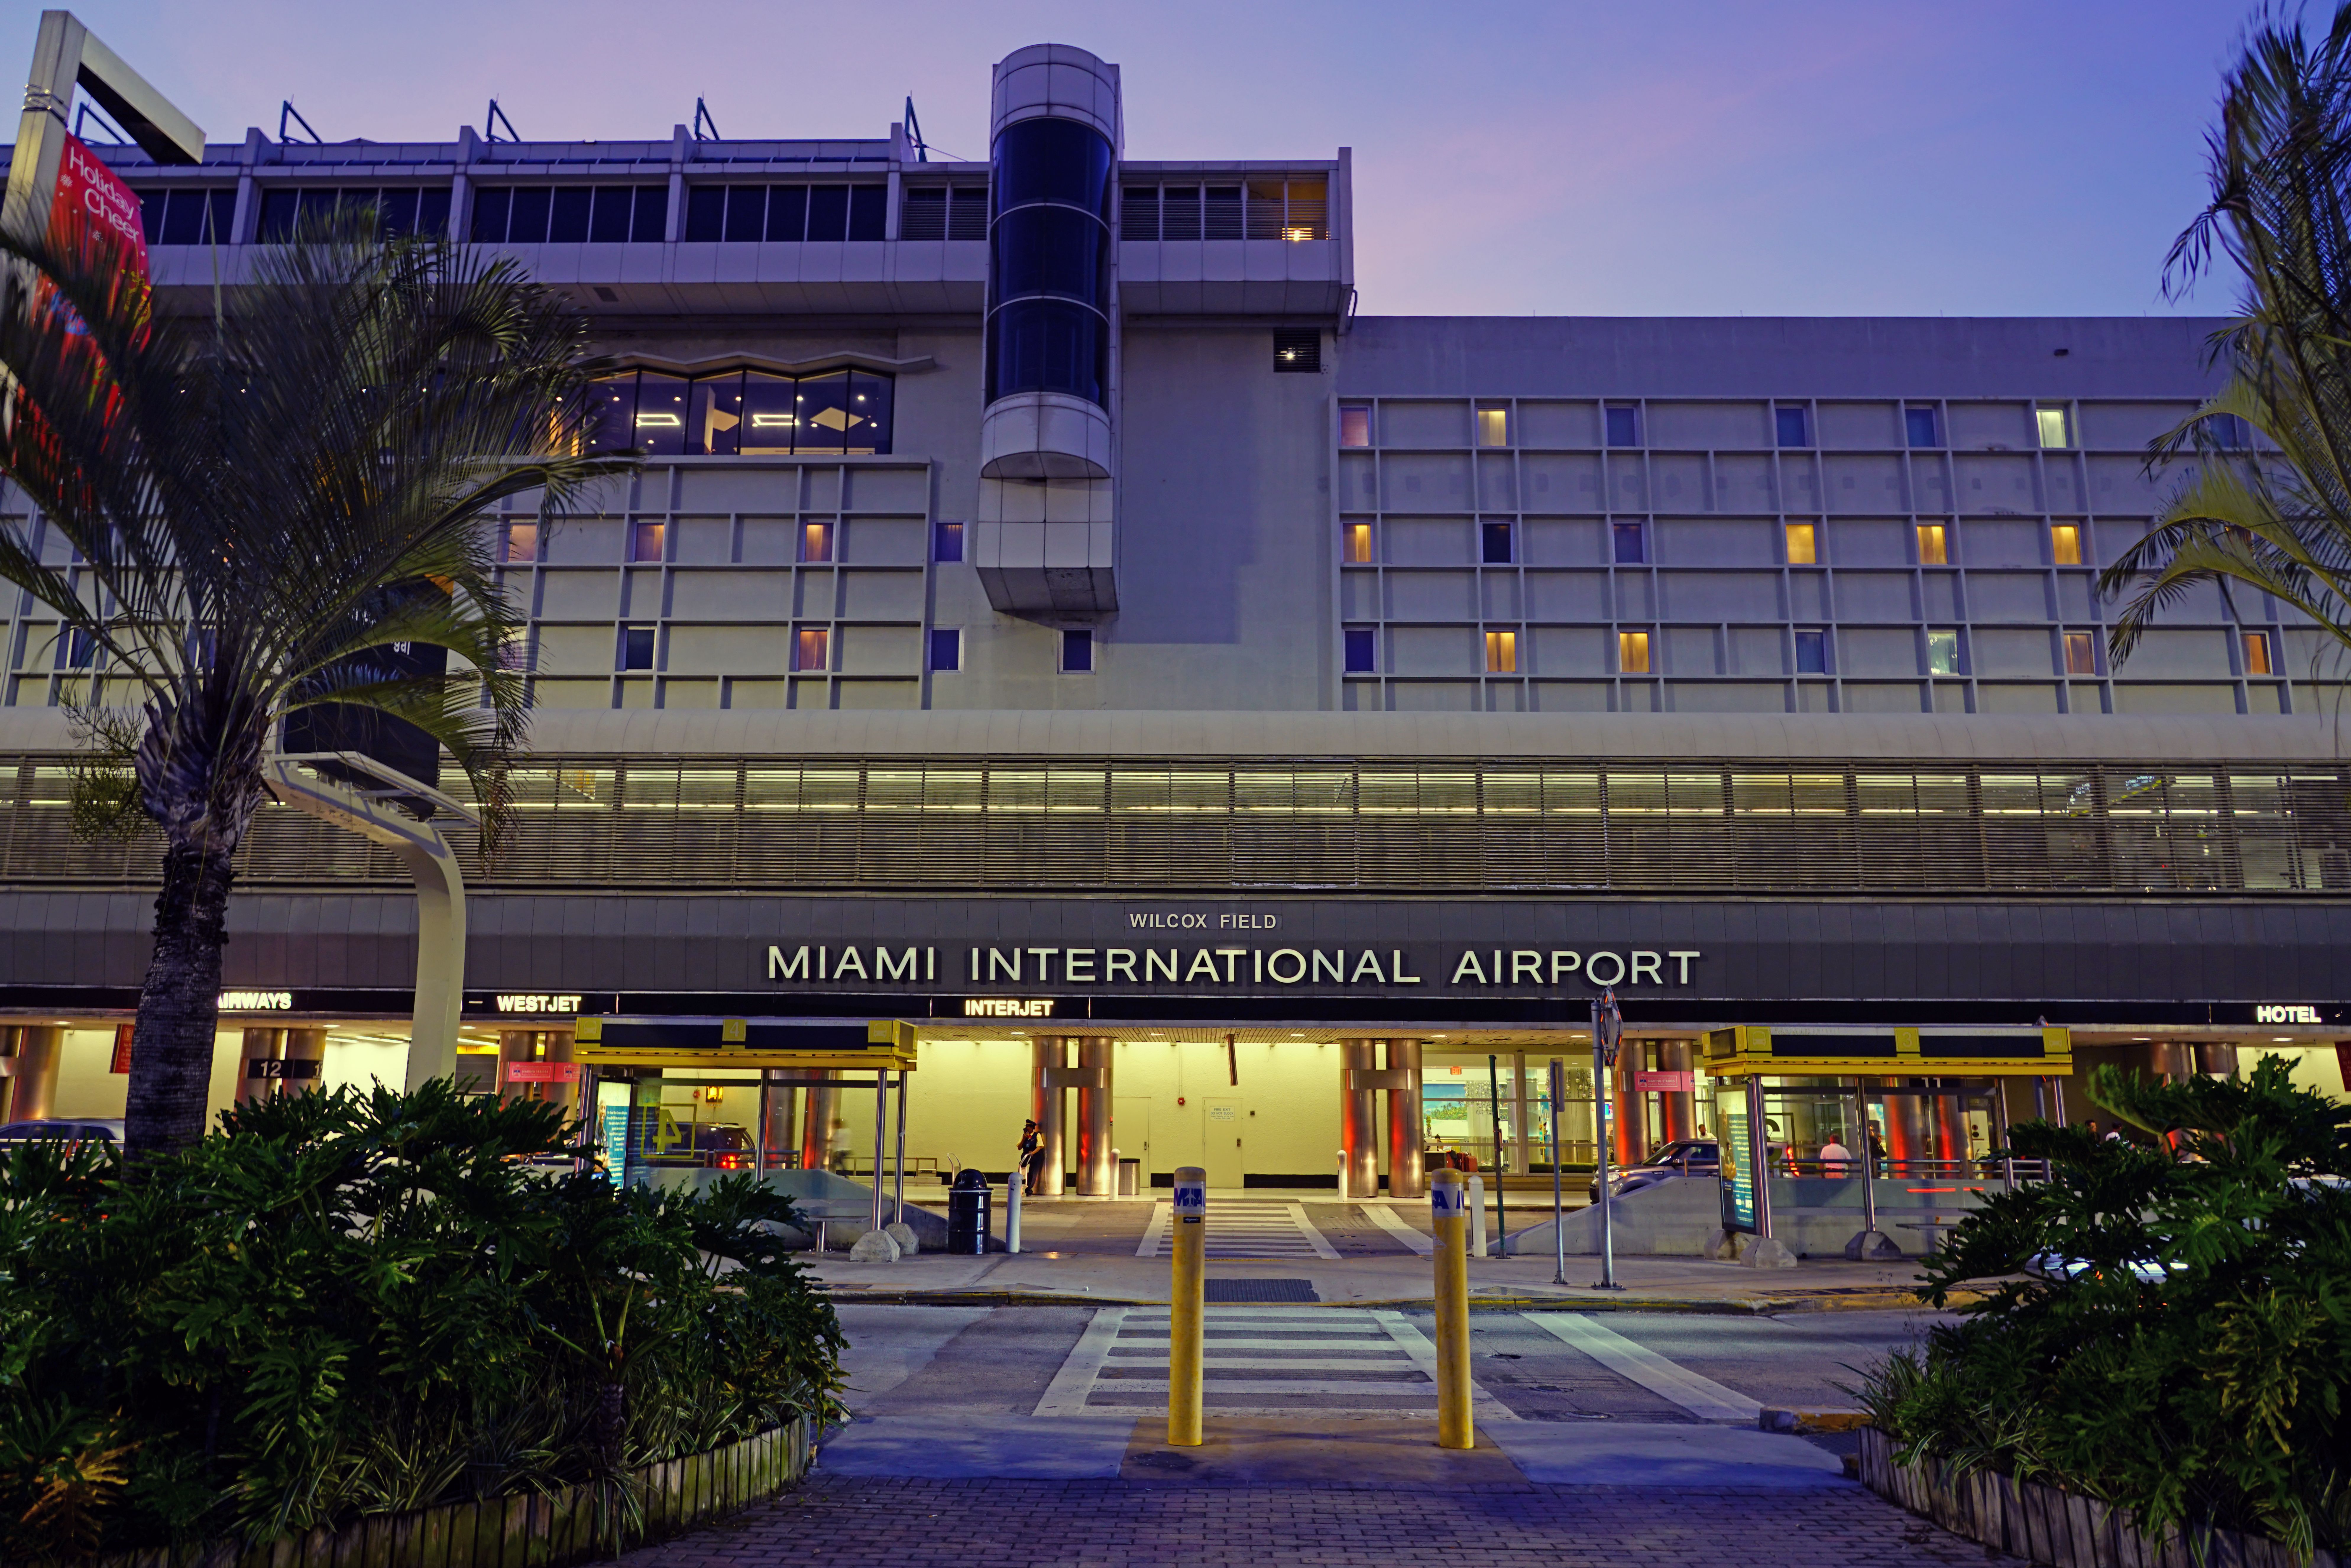 The entrance to the main terminal building at Miami International Airport.